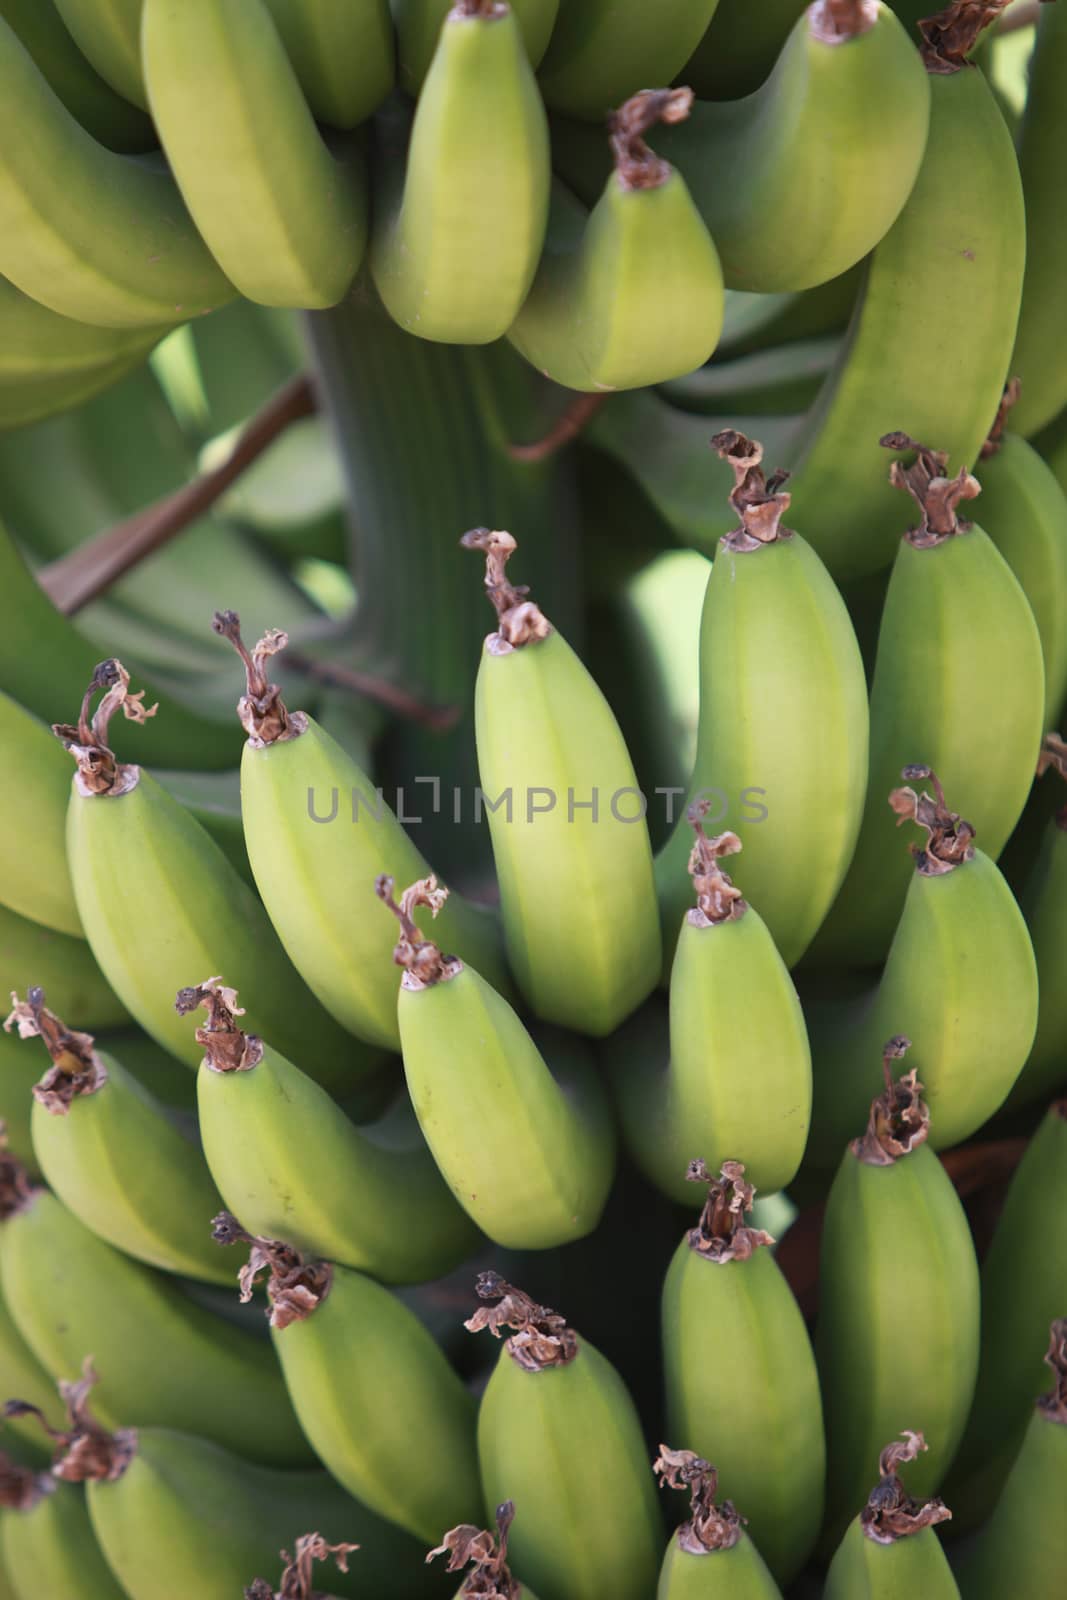 An abstract view of a bunch of organically grown bananas hanging from its tree.